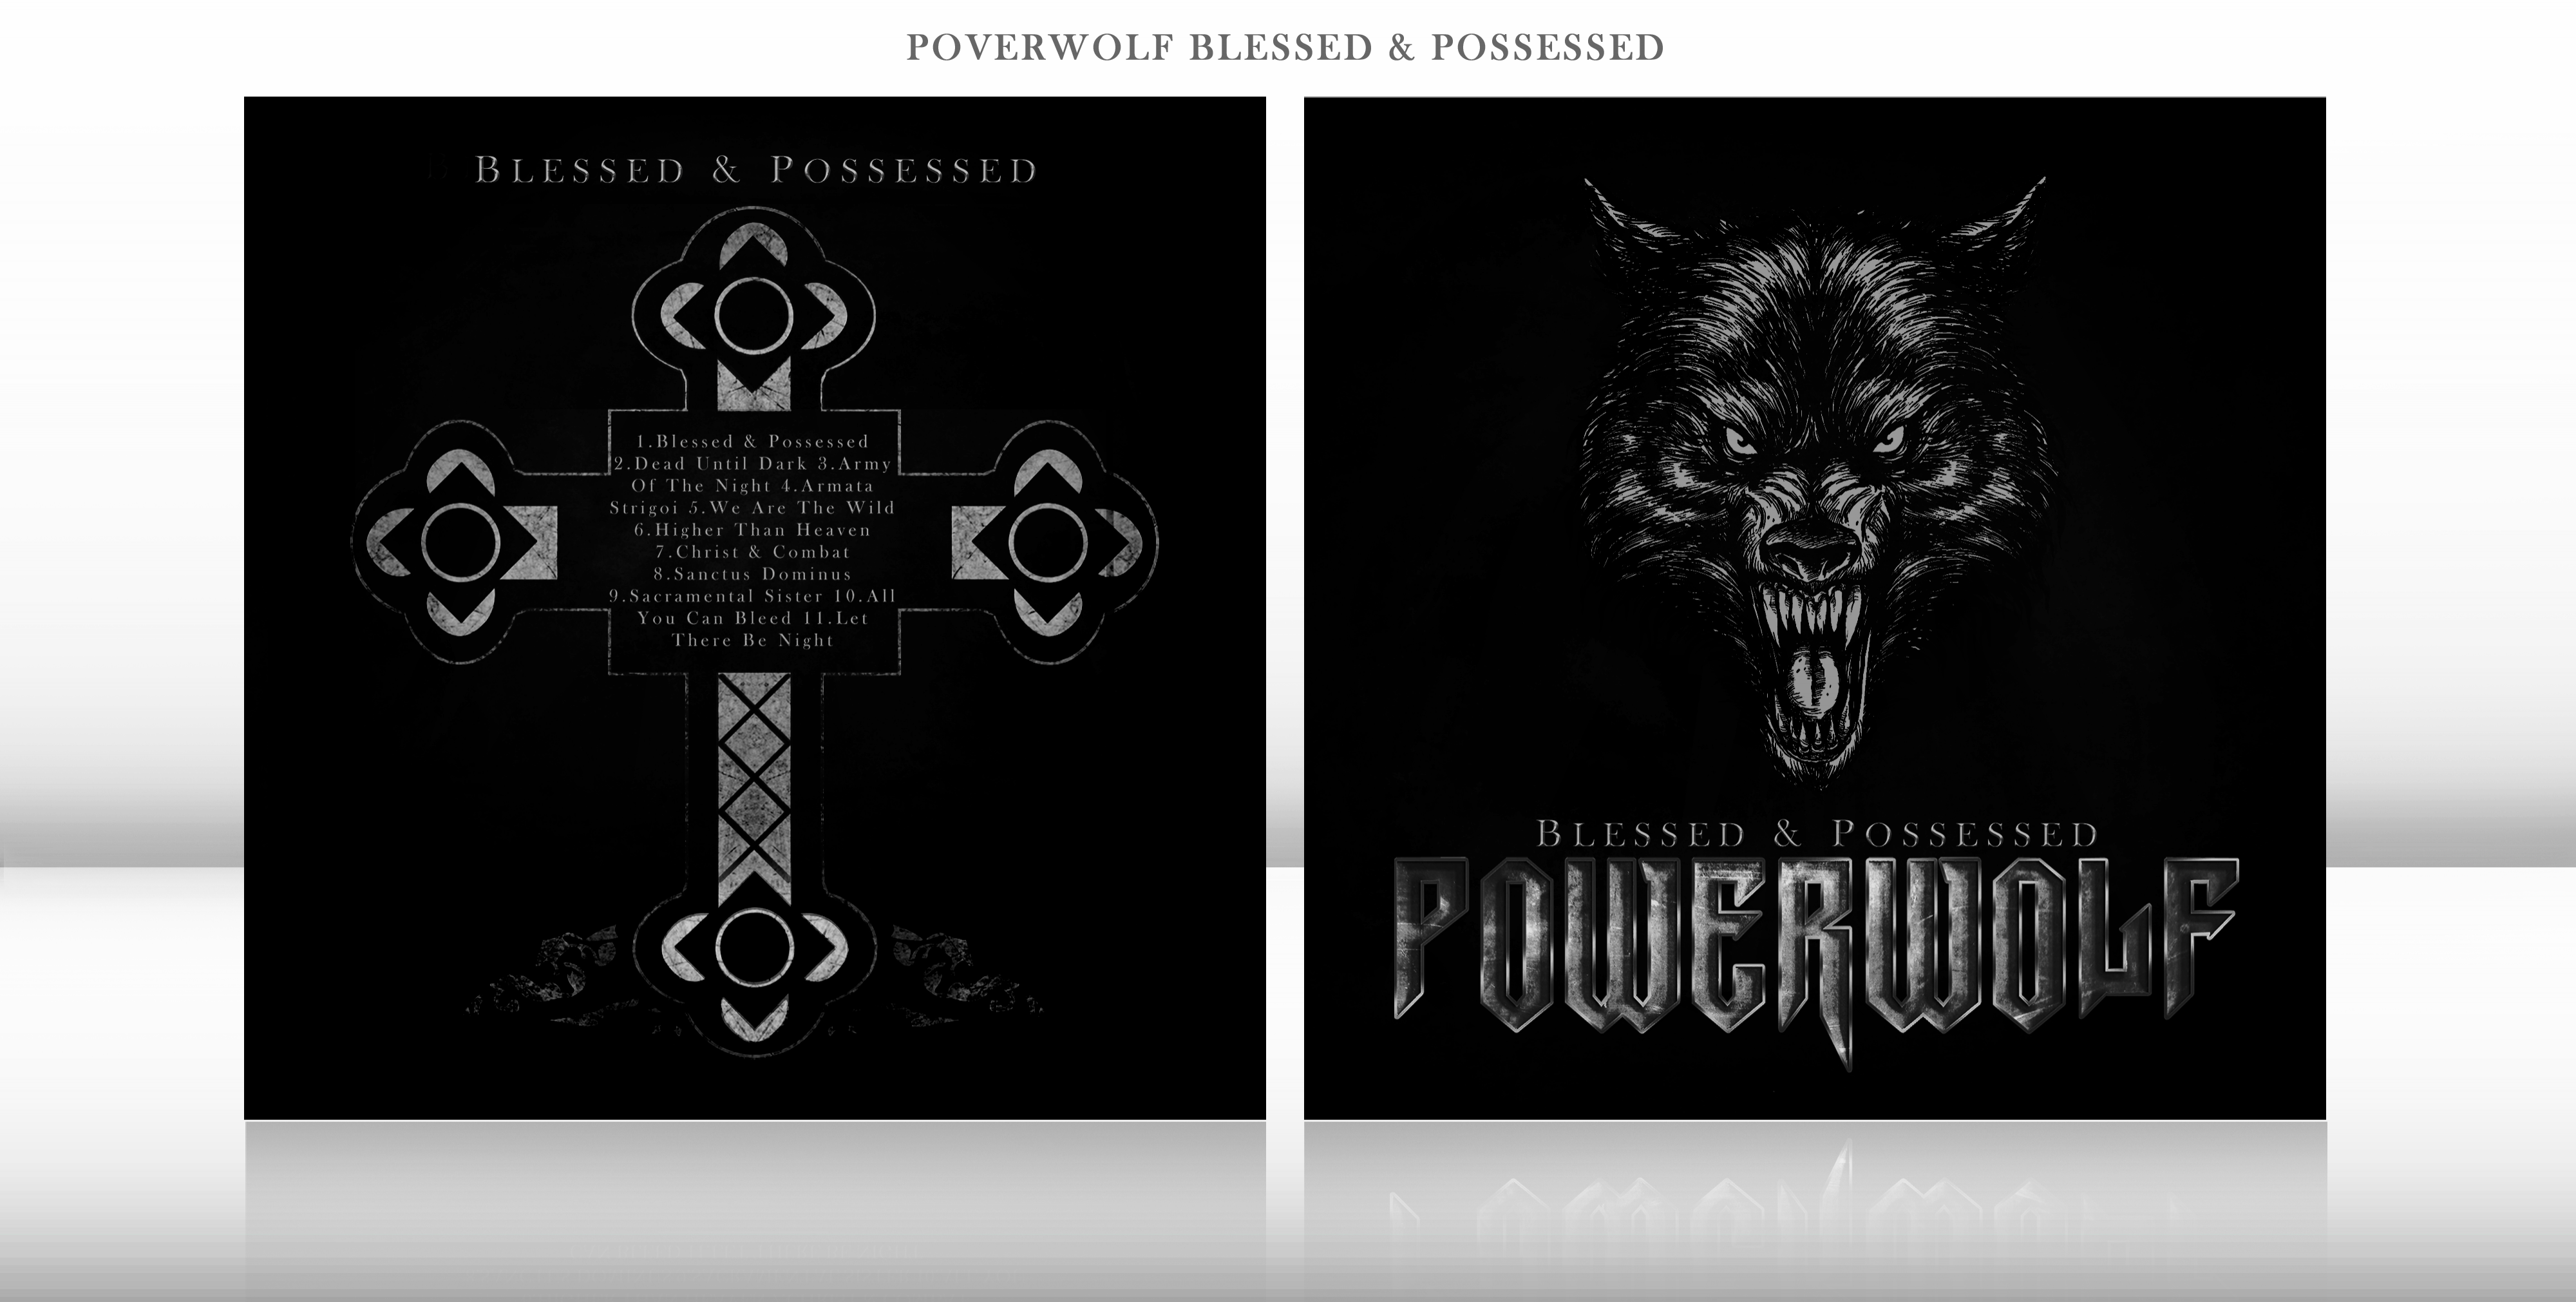 Powerwolf Blessed & Possessed box cover